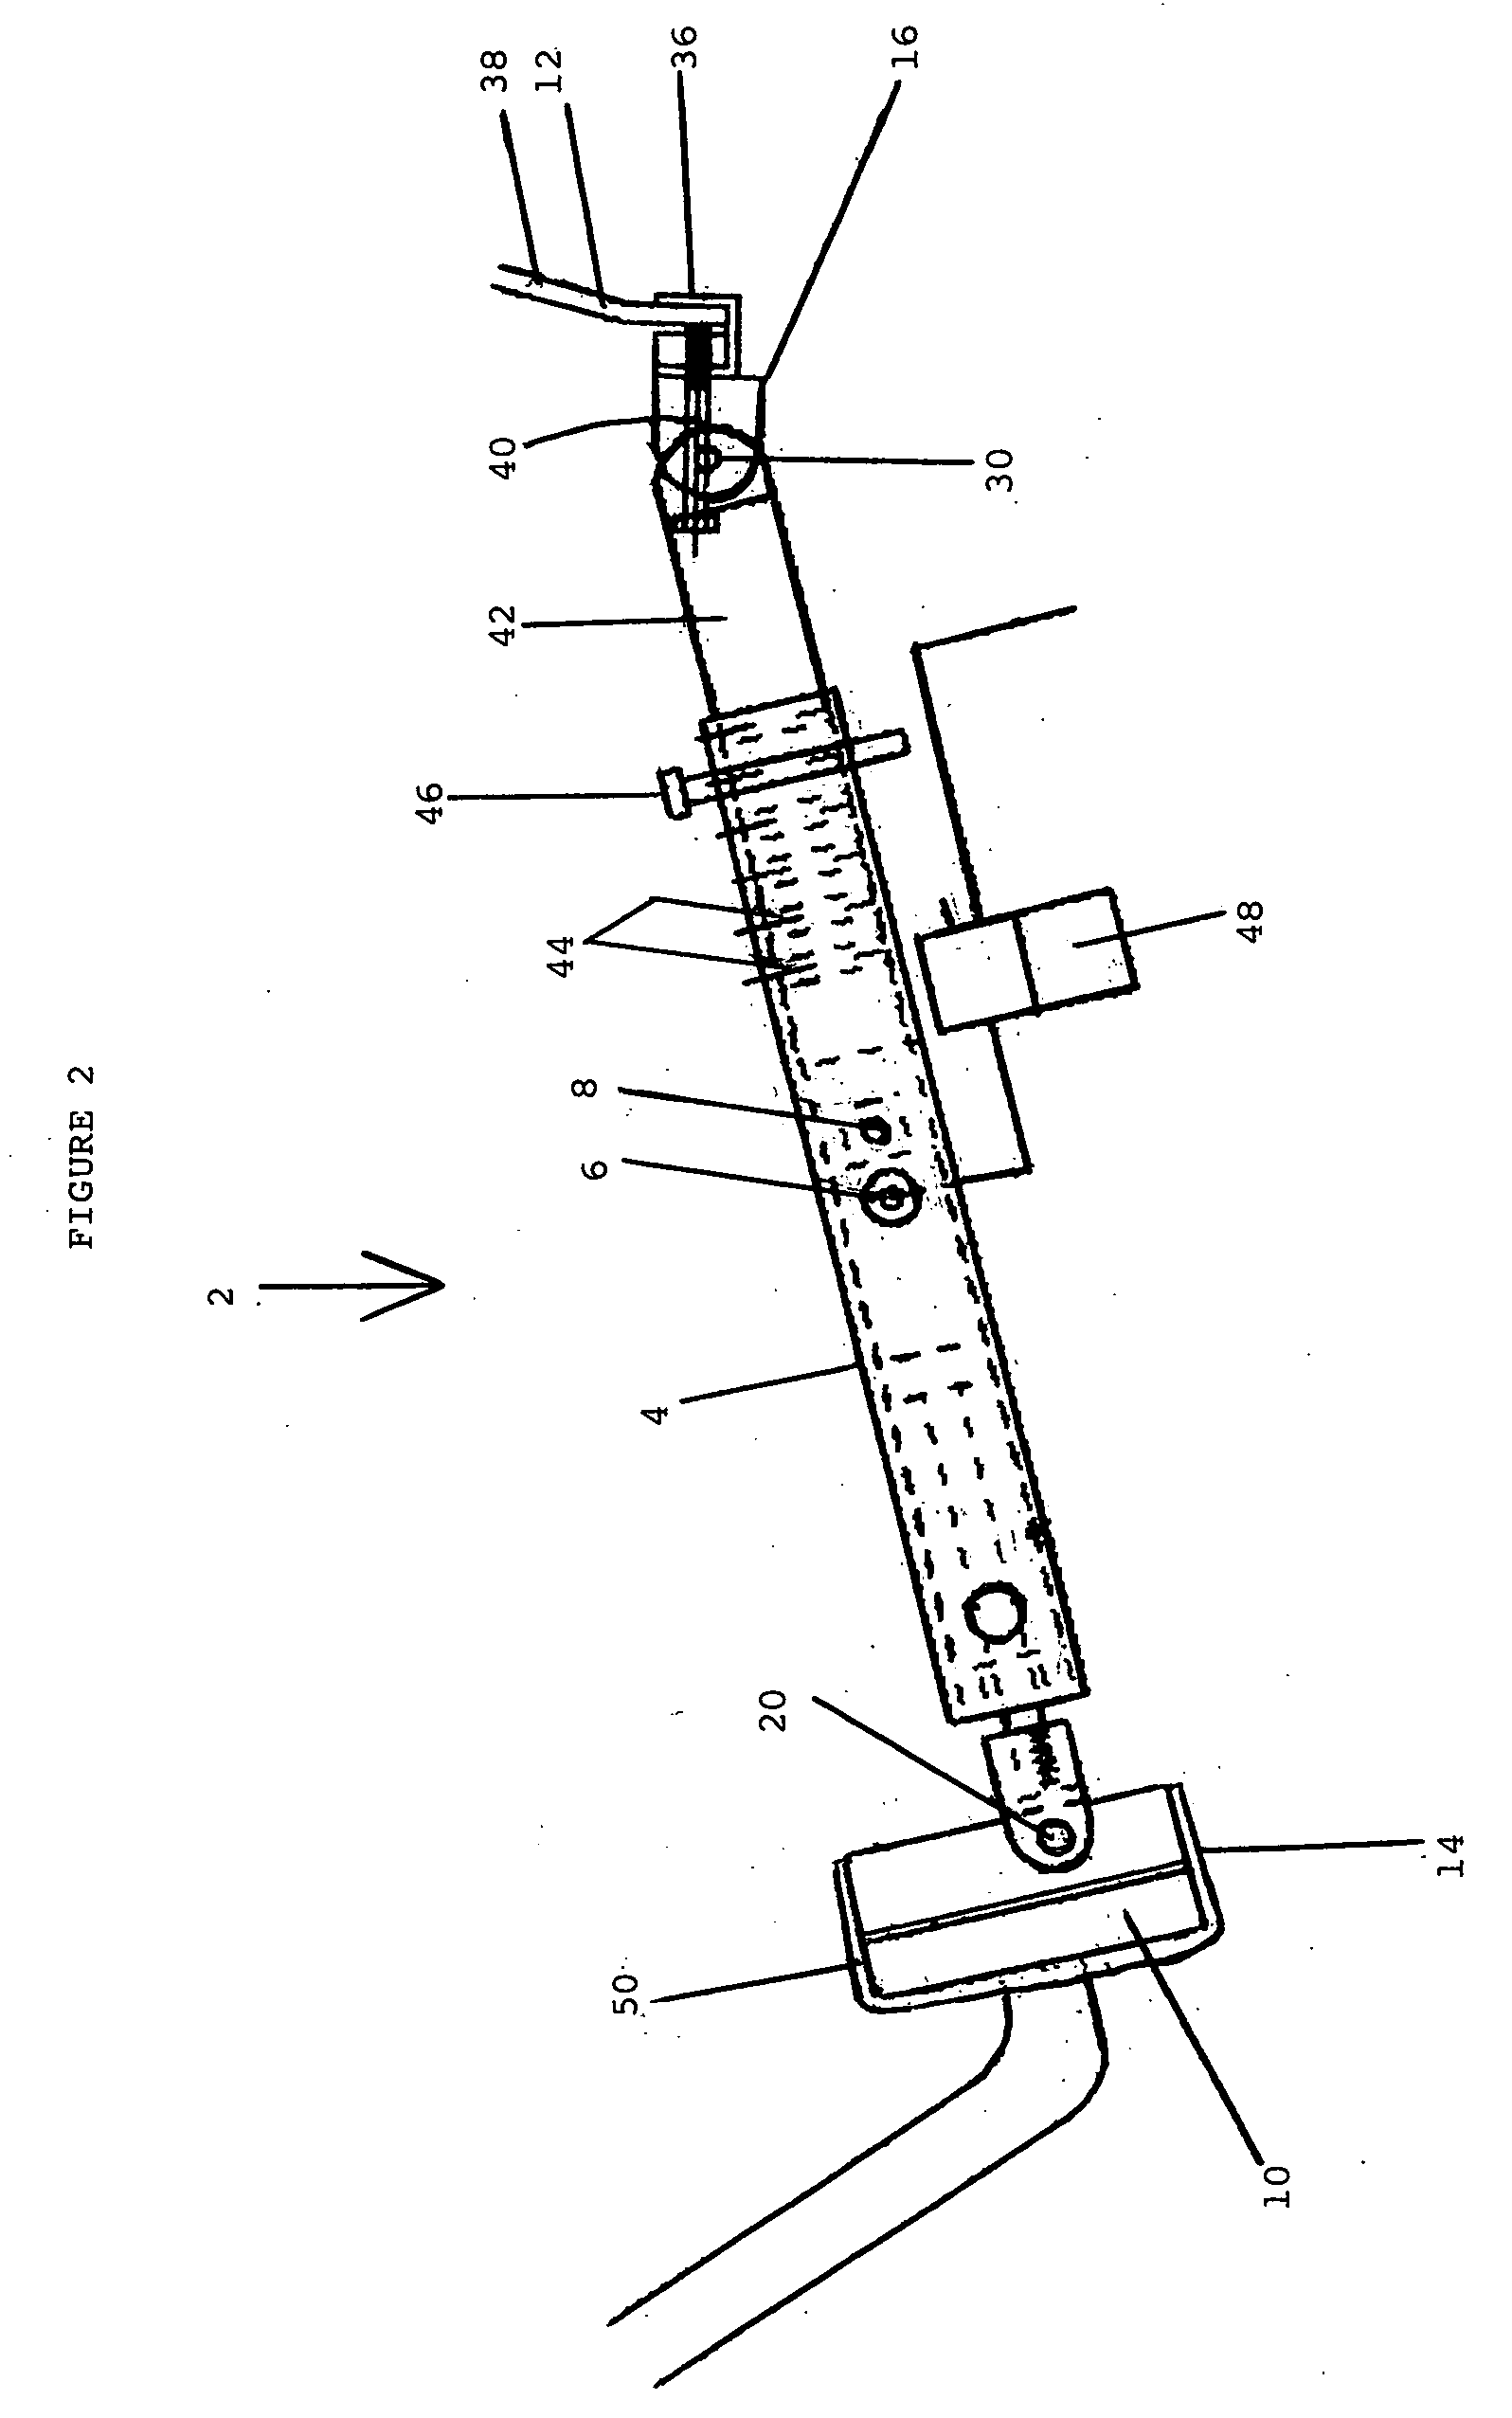 Remotely operated brake tester and method of testing